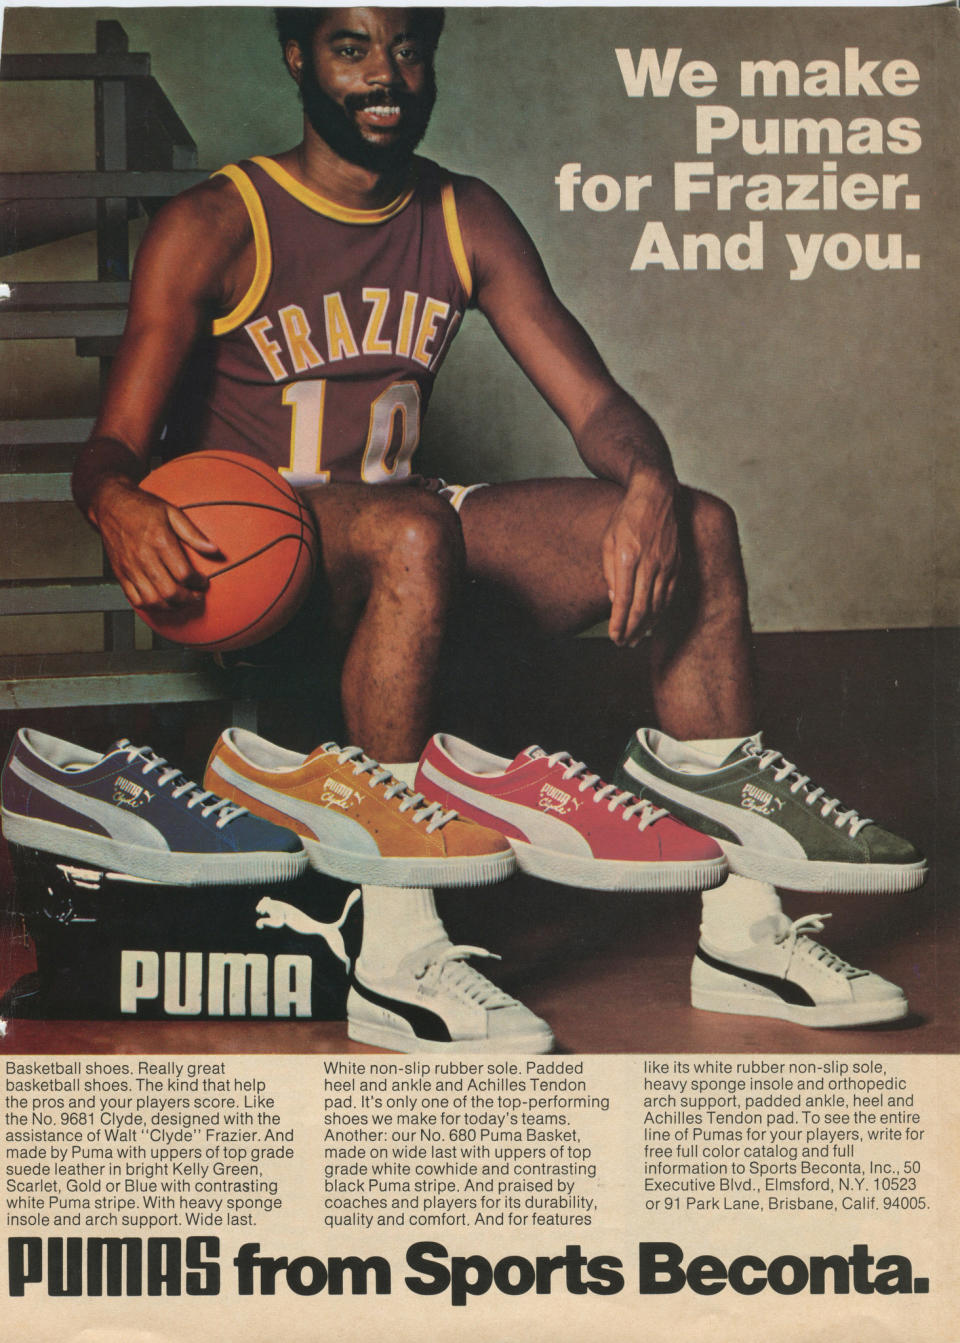 An early ad from Puma featuring Walt Frazier. - Credit: Courtesy